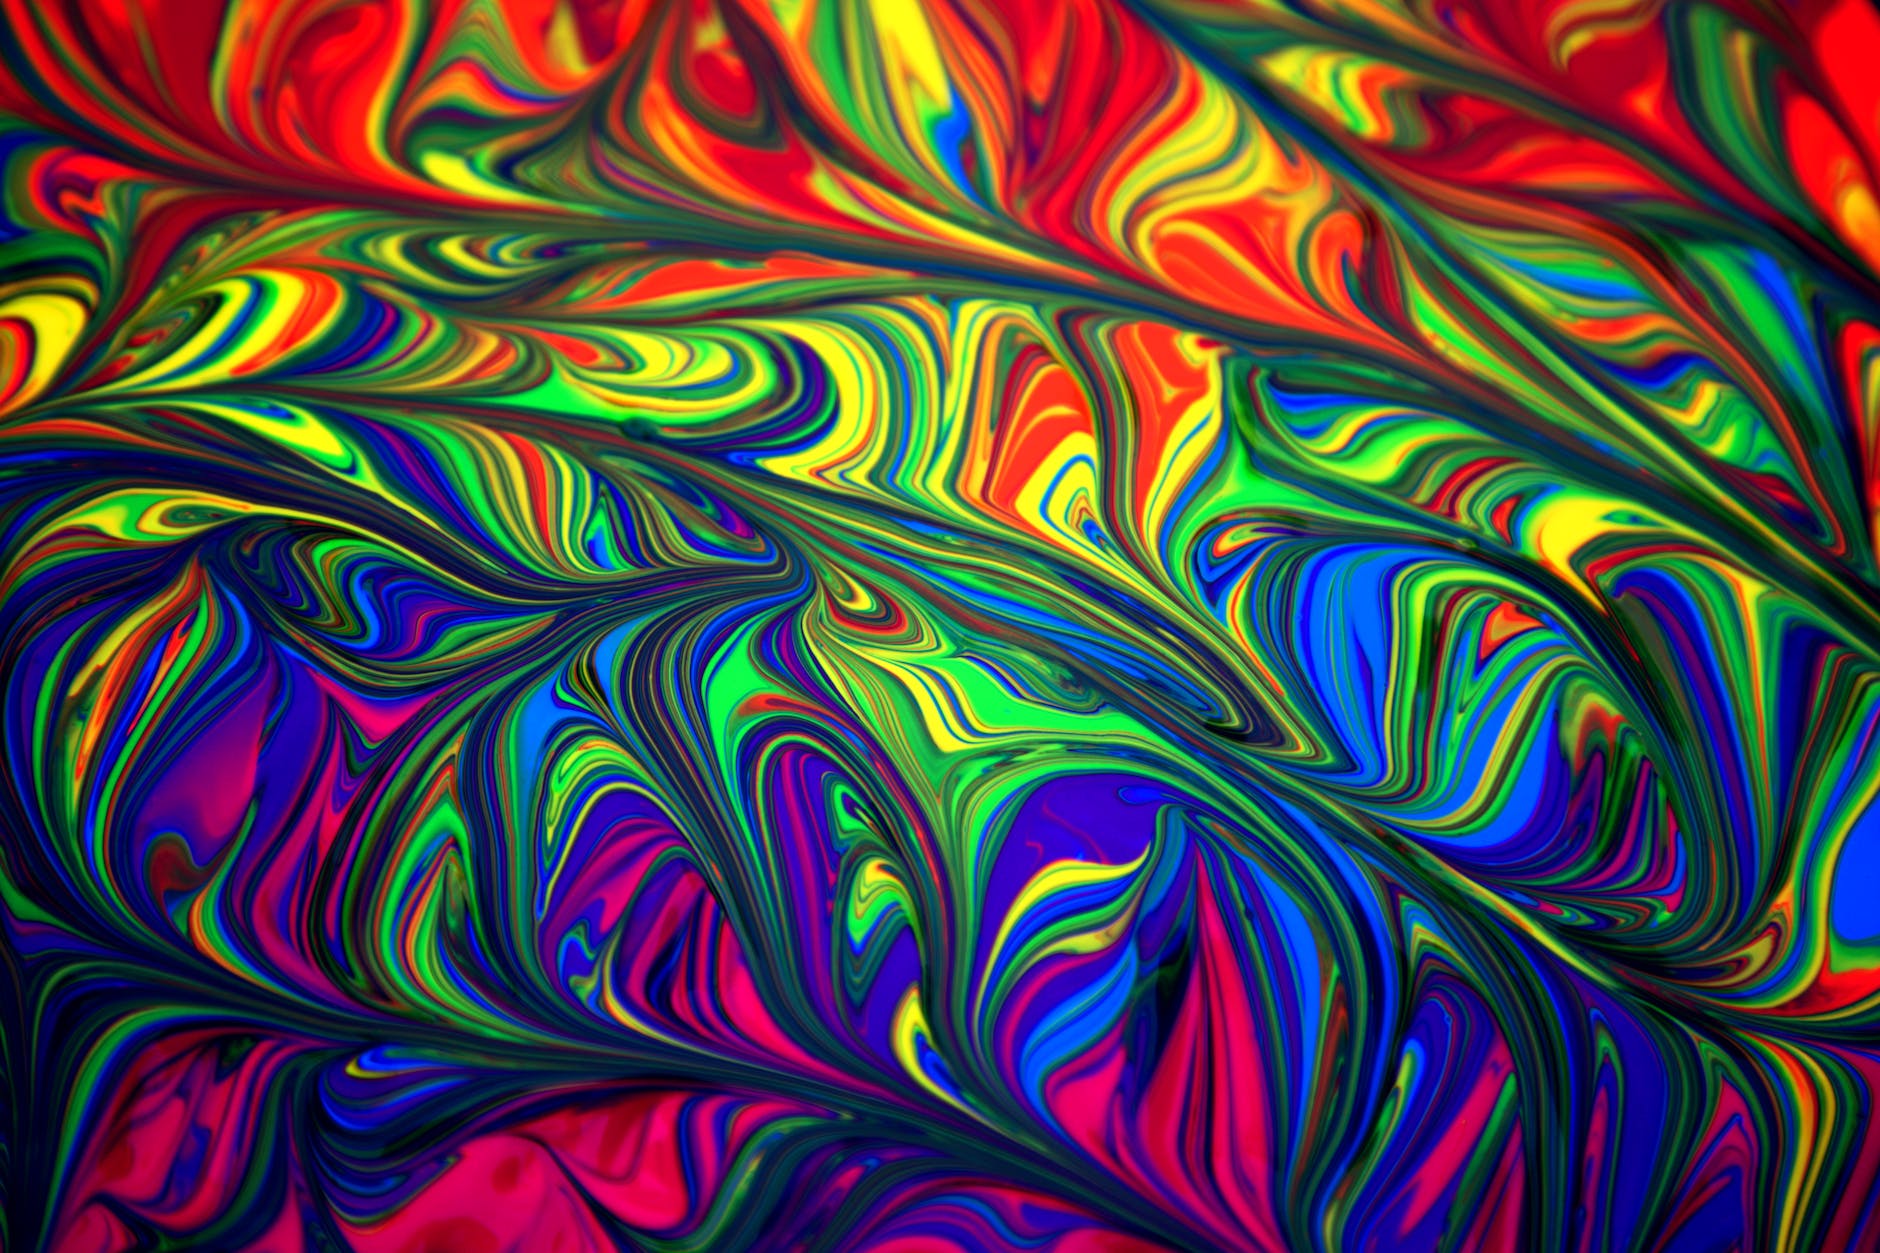 Blue, Green, and Red Abstract Illustration